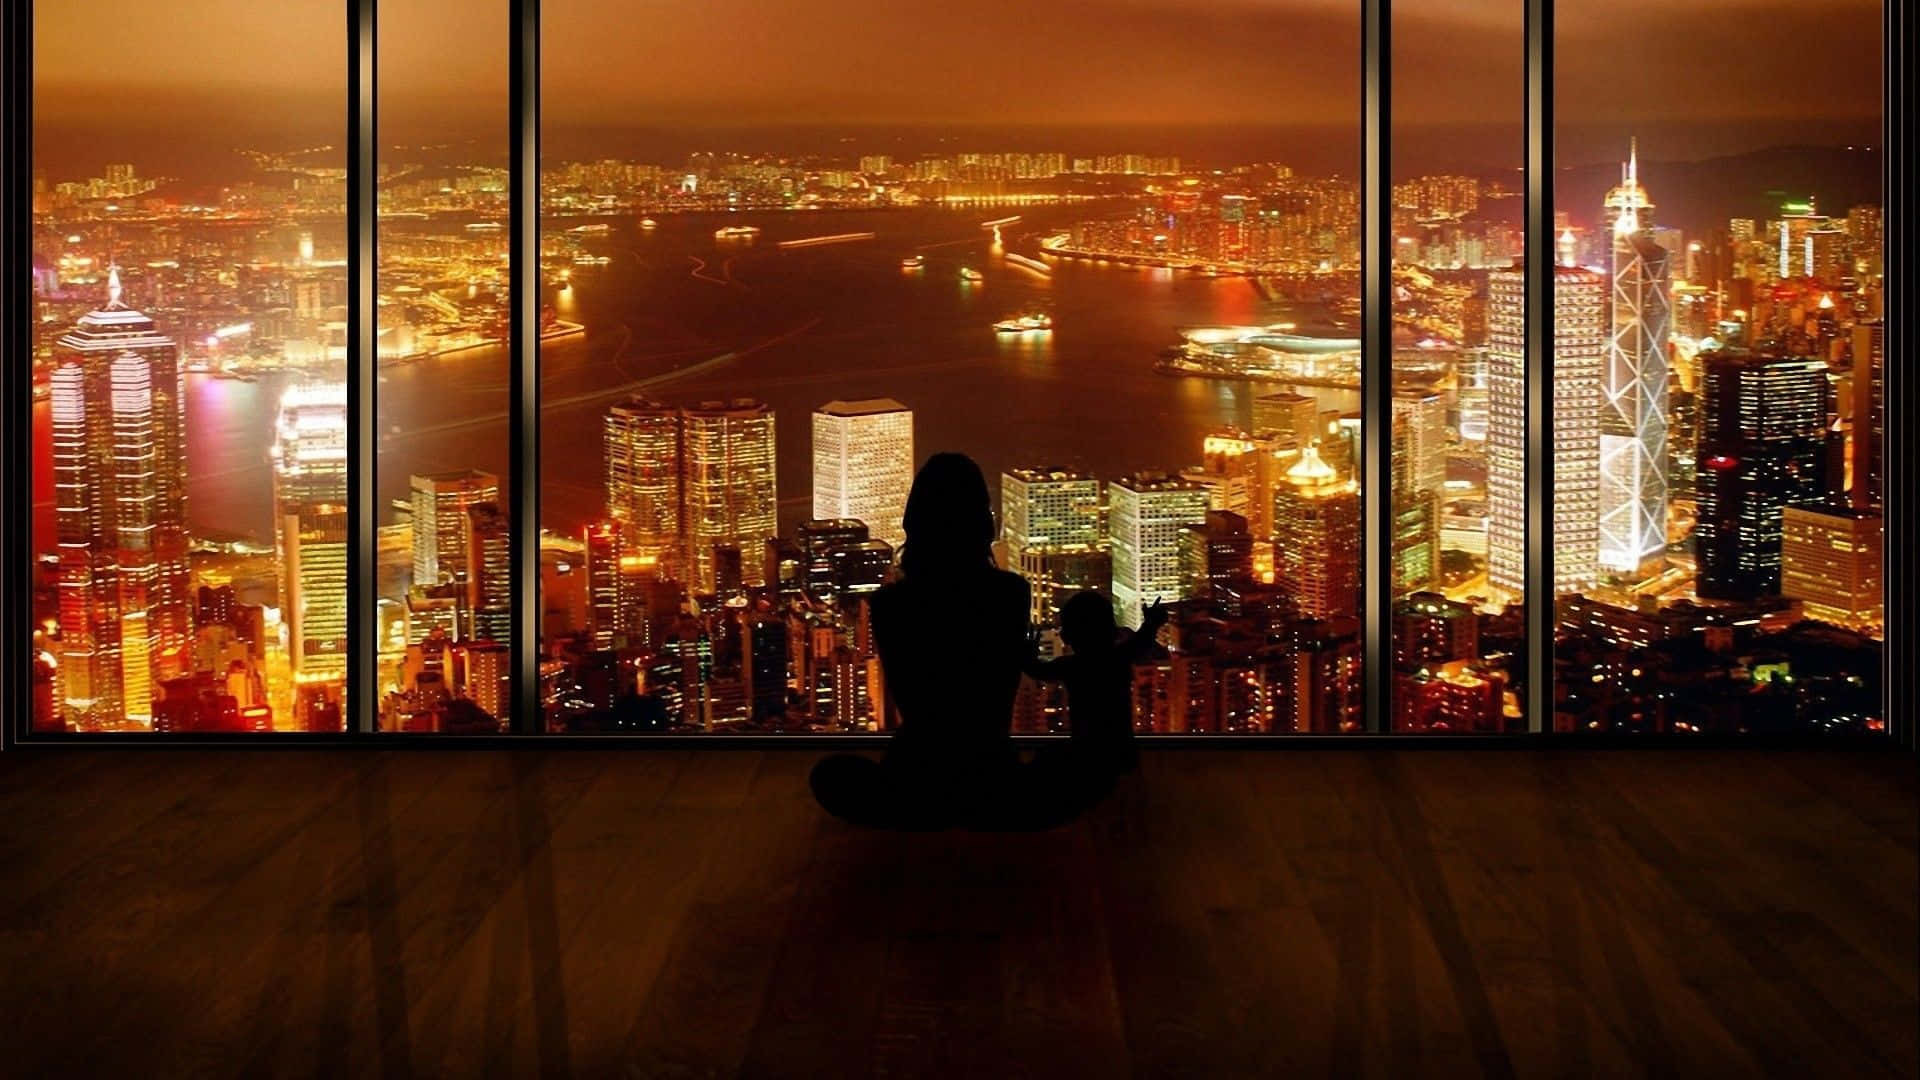 A Woman Sitting In Front Of A Window Looking Out At The City